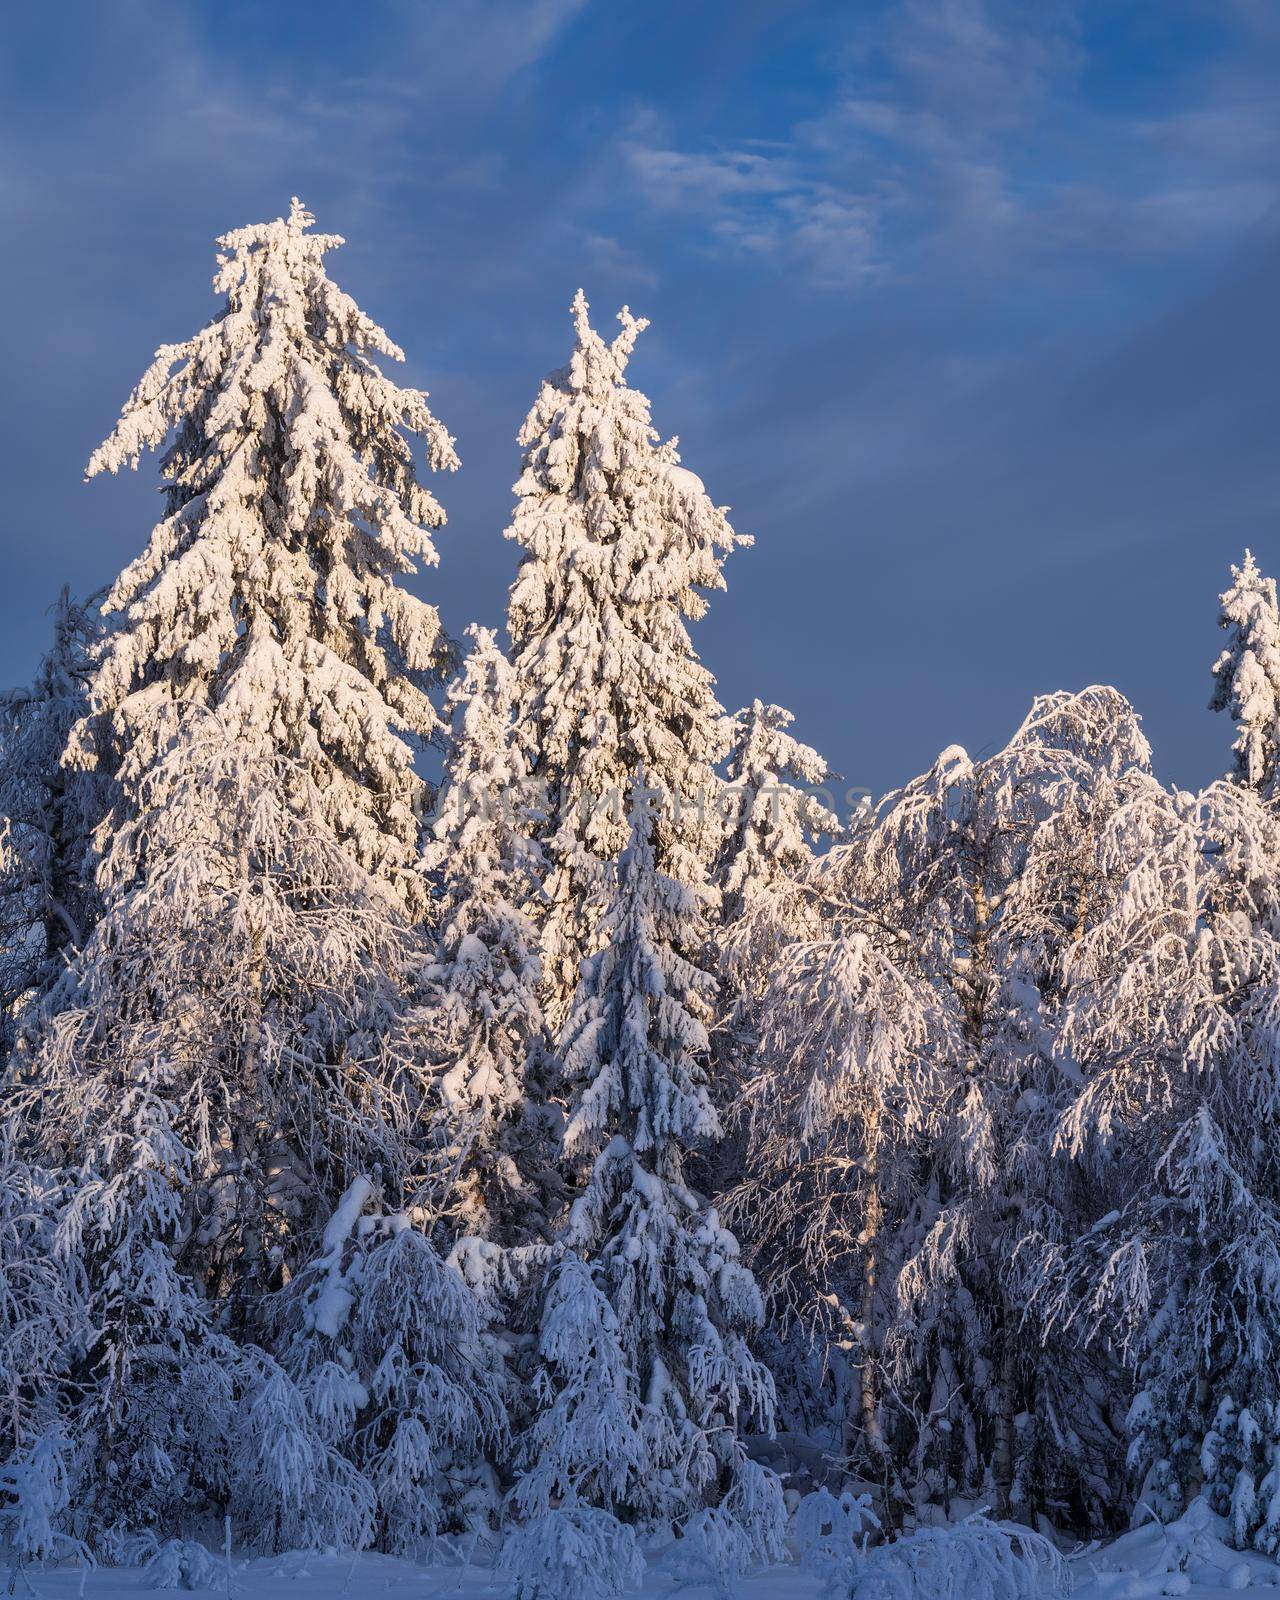 Fabulous winter landscape. Snow-covered trees in the Ural winter forest